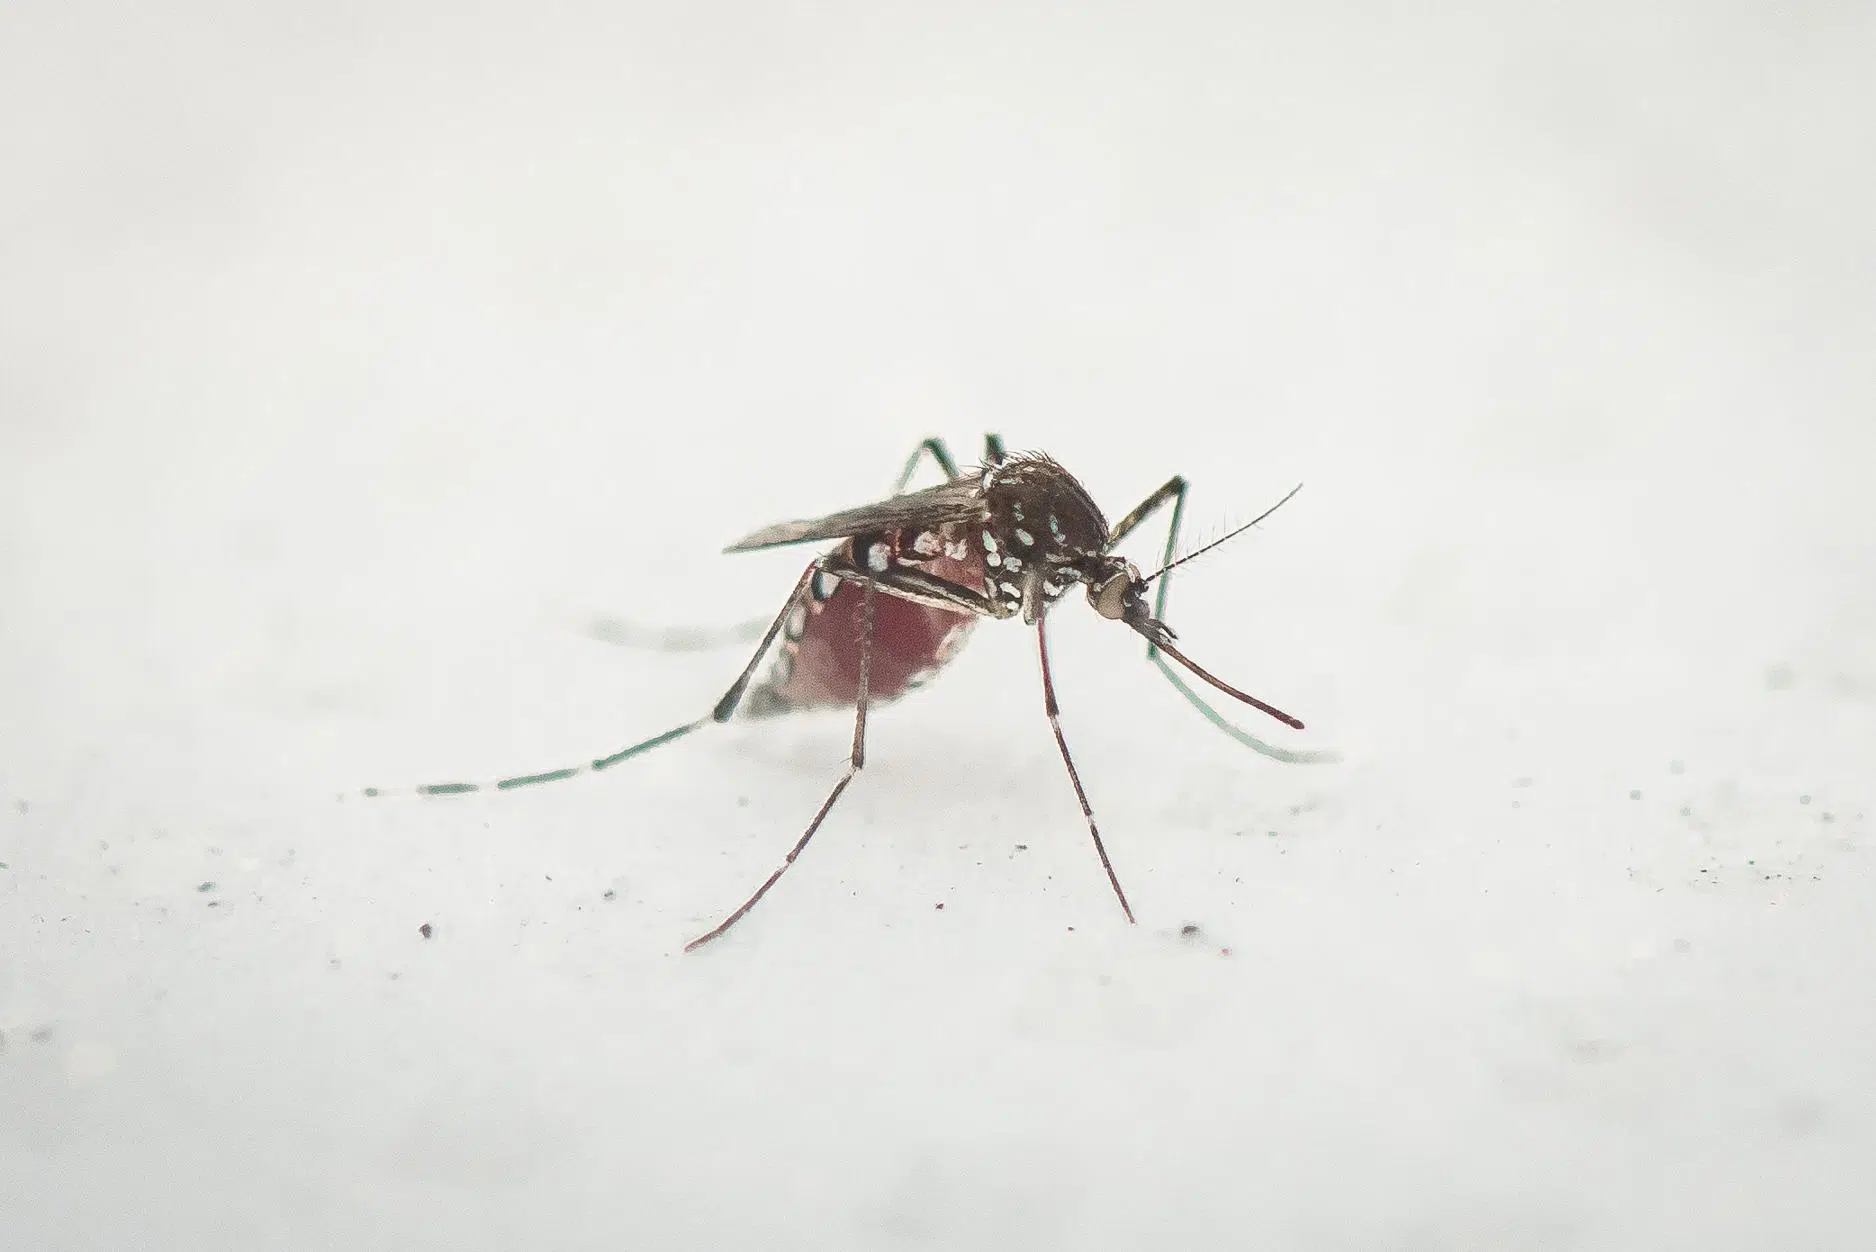 KDHE issues high-risk warning for West Nile virus infections affecting most of Kansas